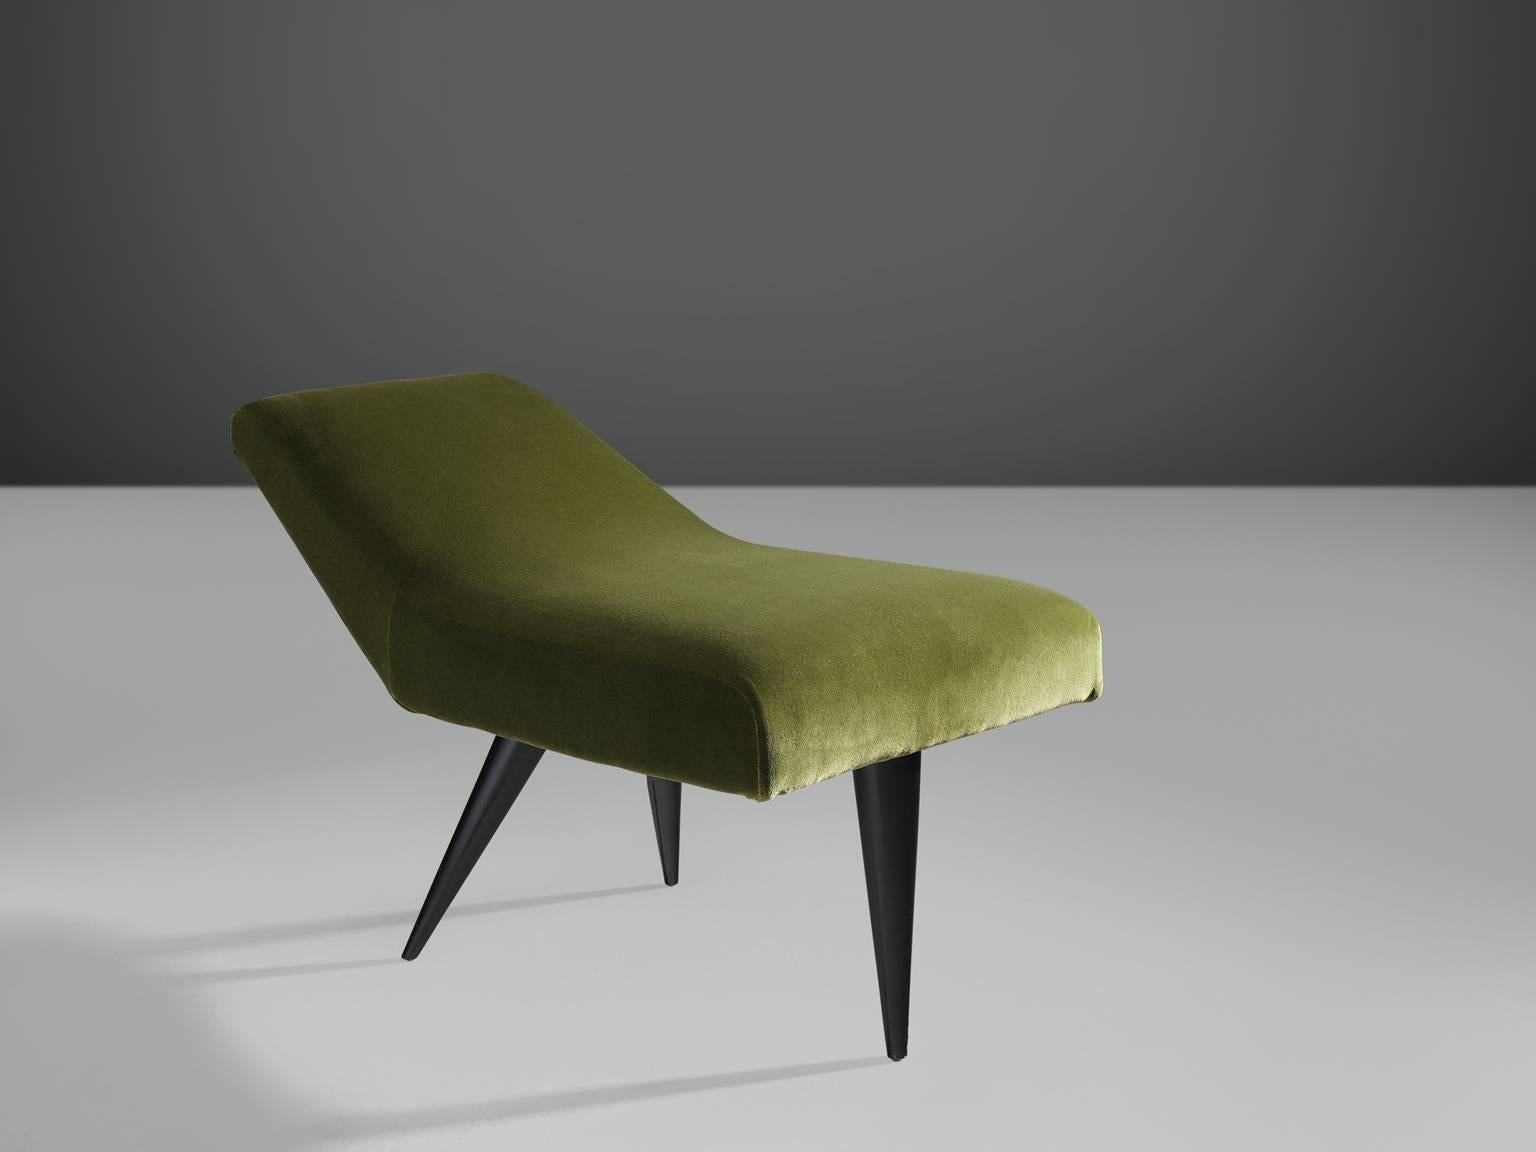 Stool, in beech and green velvet, Italy, 1970

This small stool in the shape of a chaise longue is designed in Italy. The stained beech frame is curved and has three tapered legs. The curved seat in combination with the tripod frame gives this